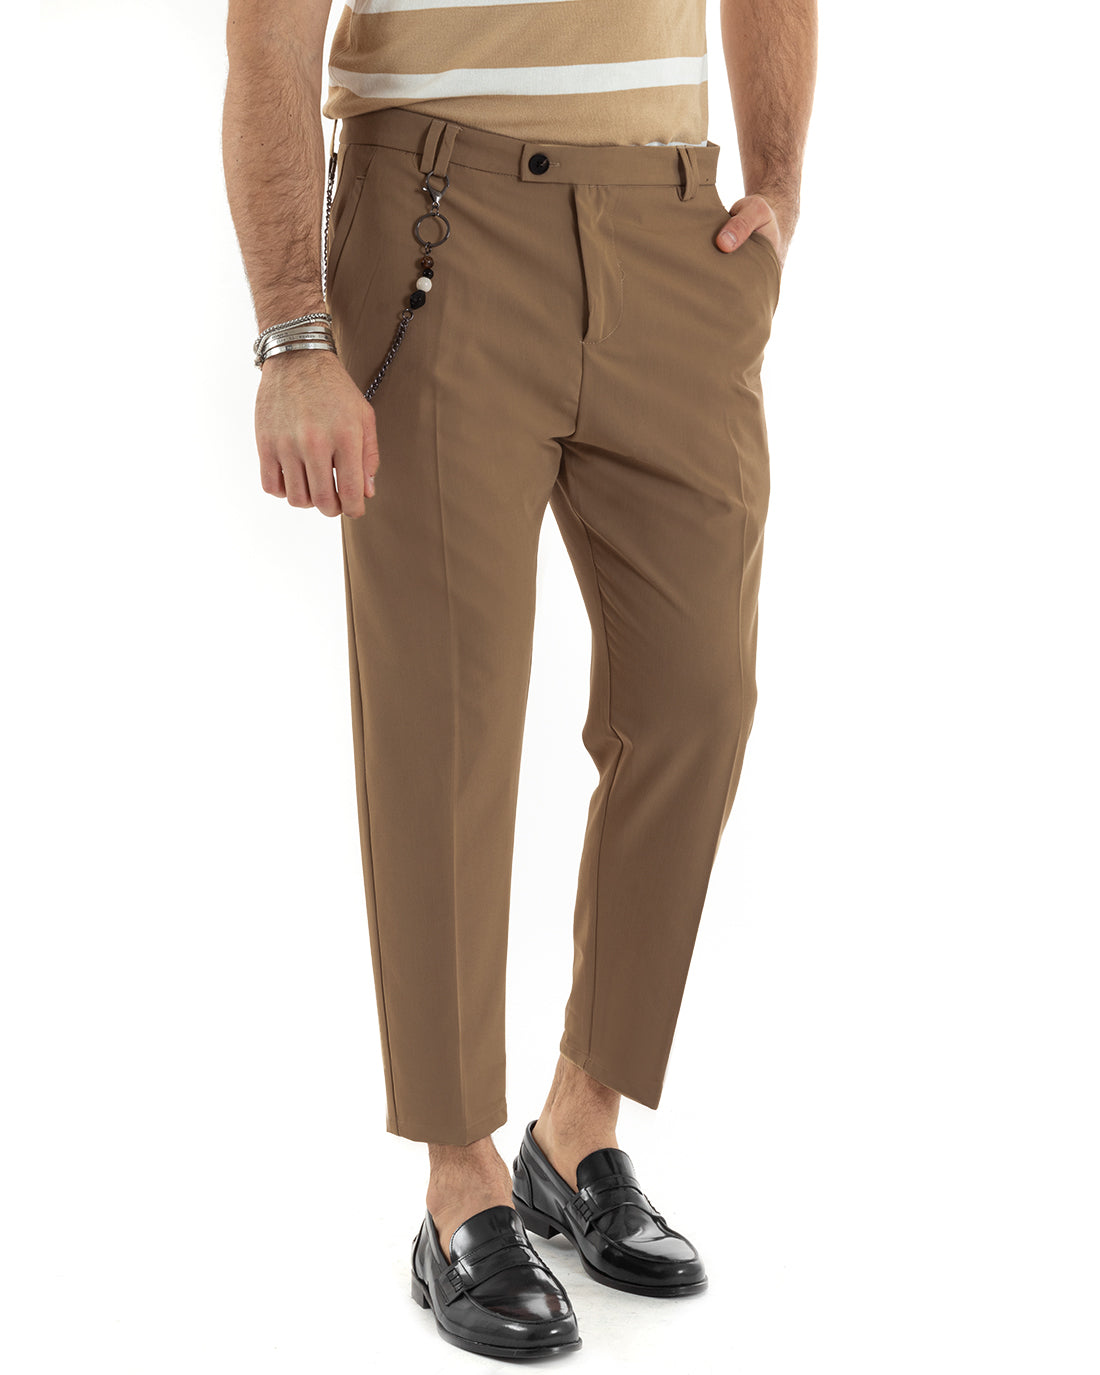 Men's Long Solid Color Black Viscose Trousers with Elongated Button GIOSAL-P5678A